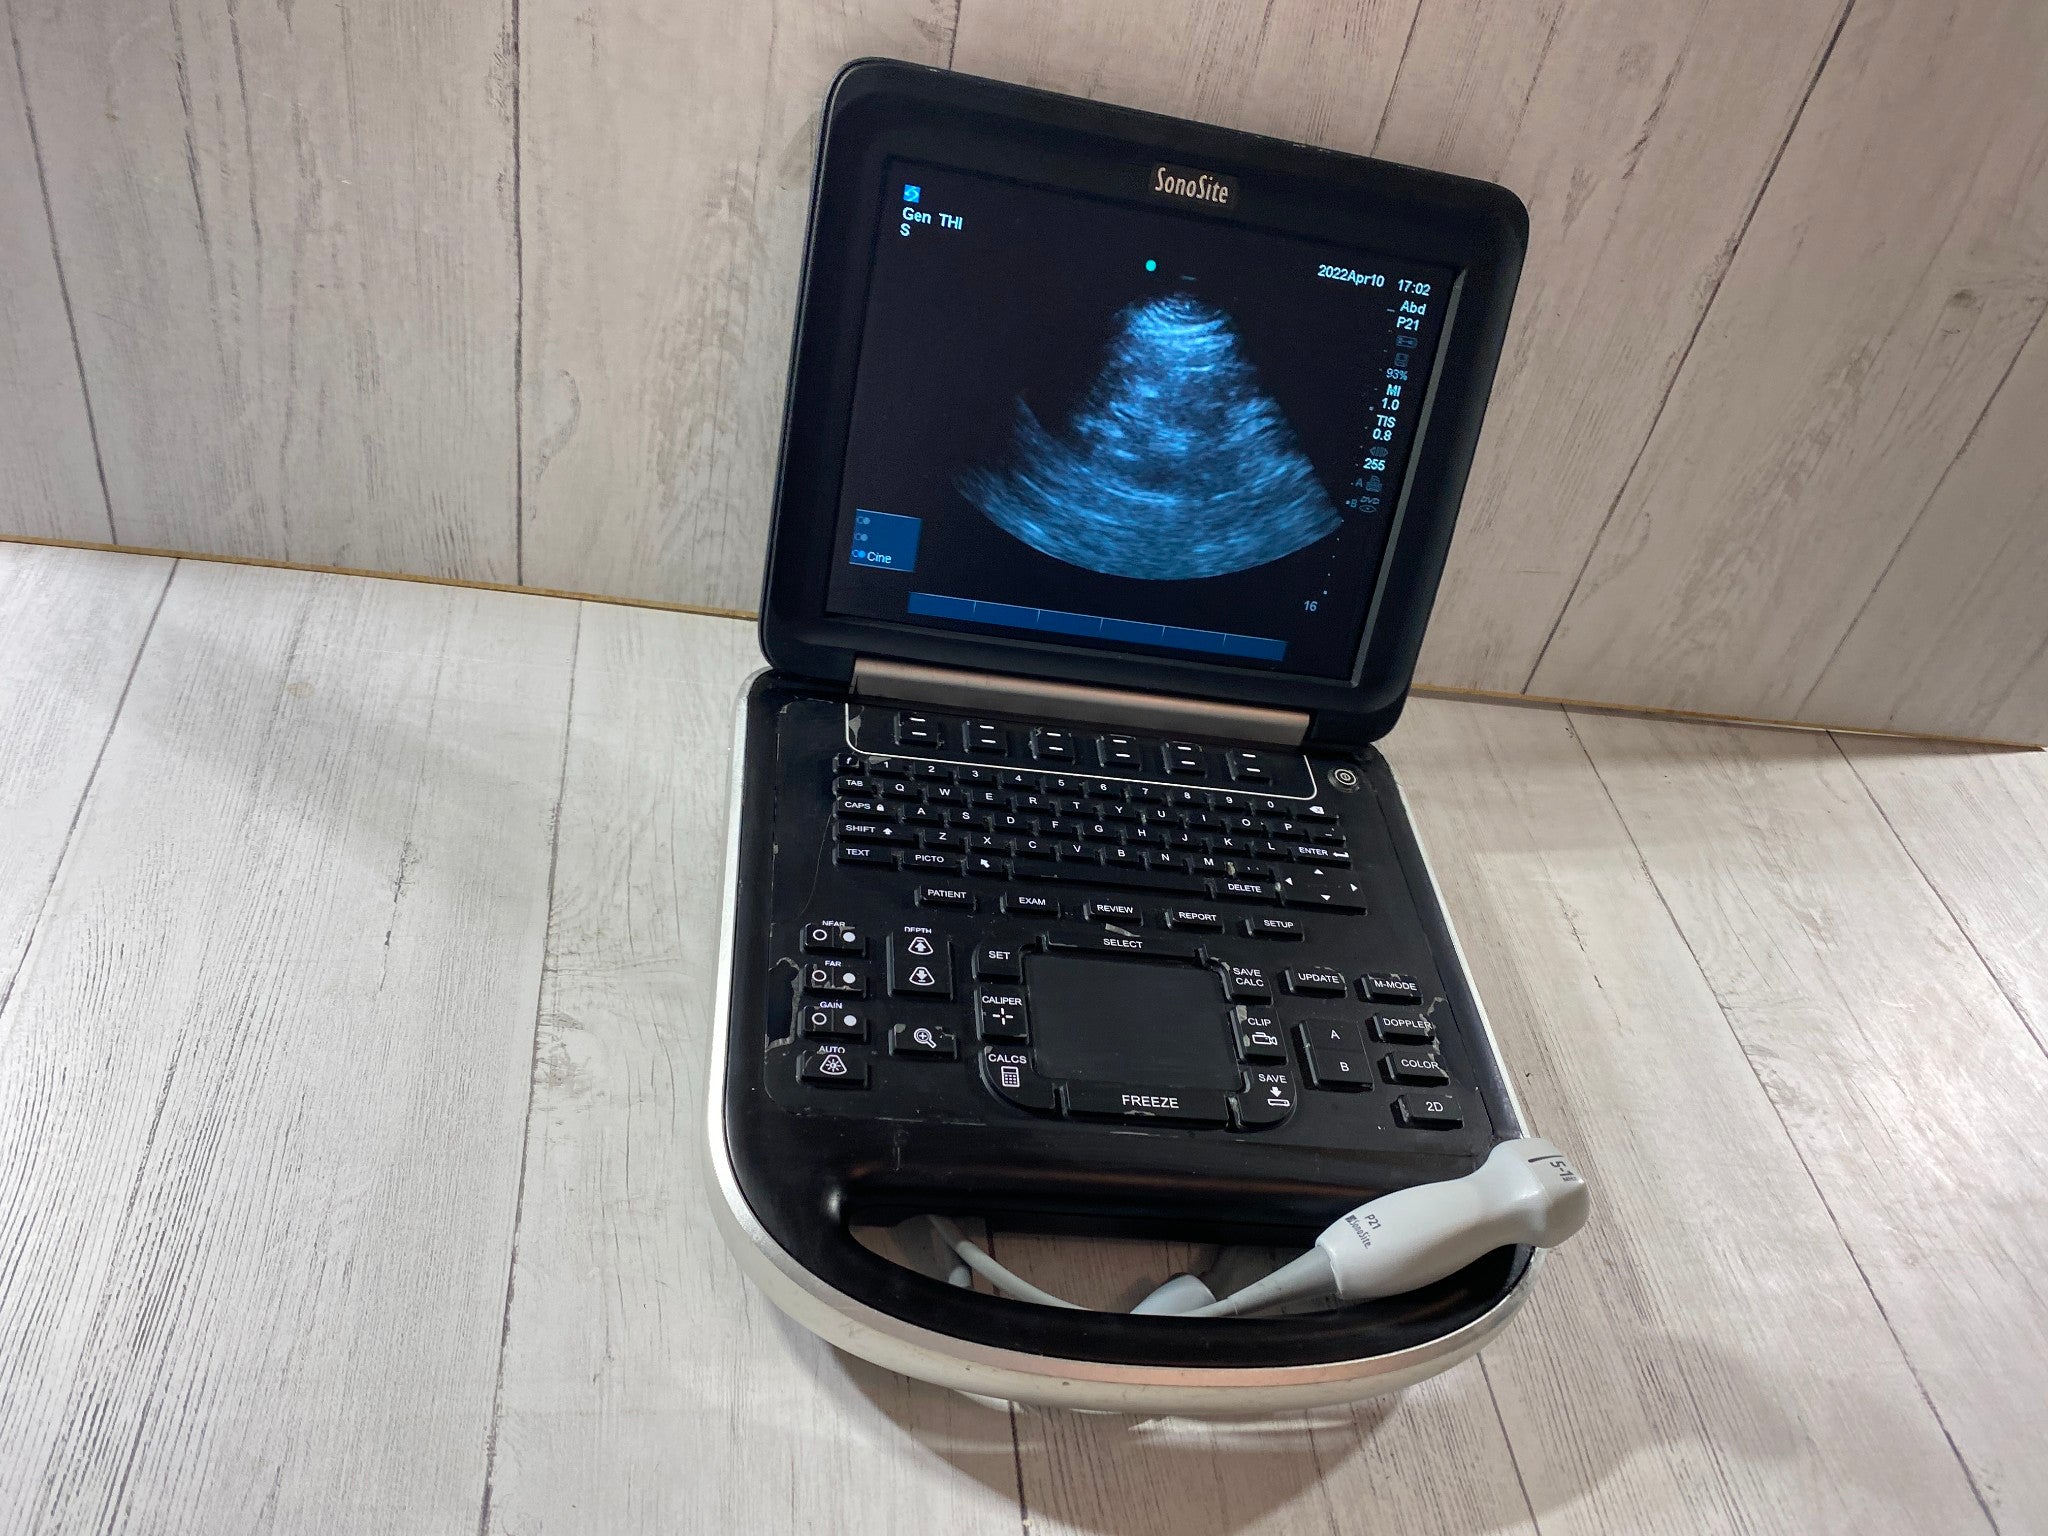 Sonosite Edge Portable ultrasound Manufactured 2013 with P21 Cardiac probe DIAGNOSTIC ULTRASOUND MACHINES FOR SALE